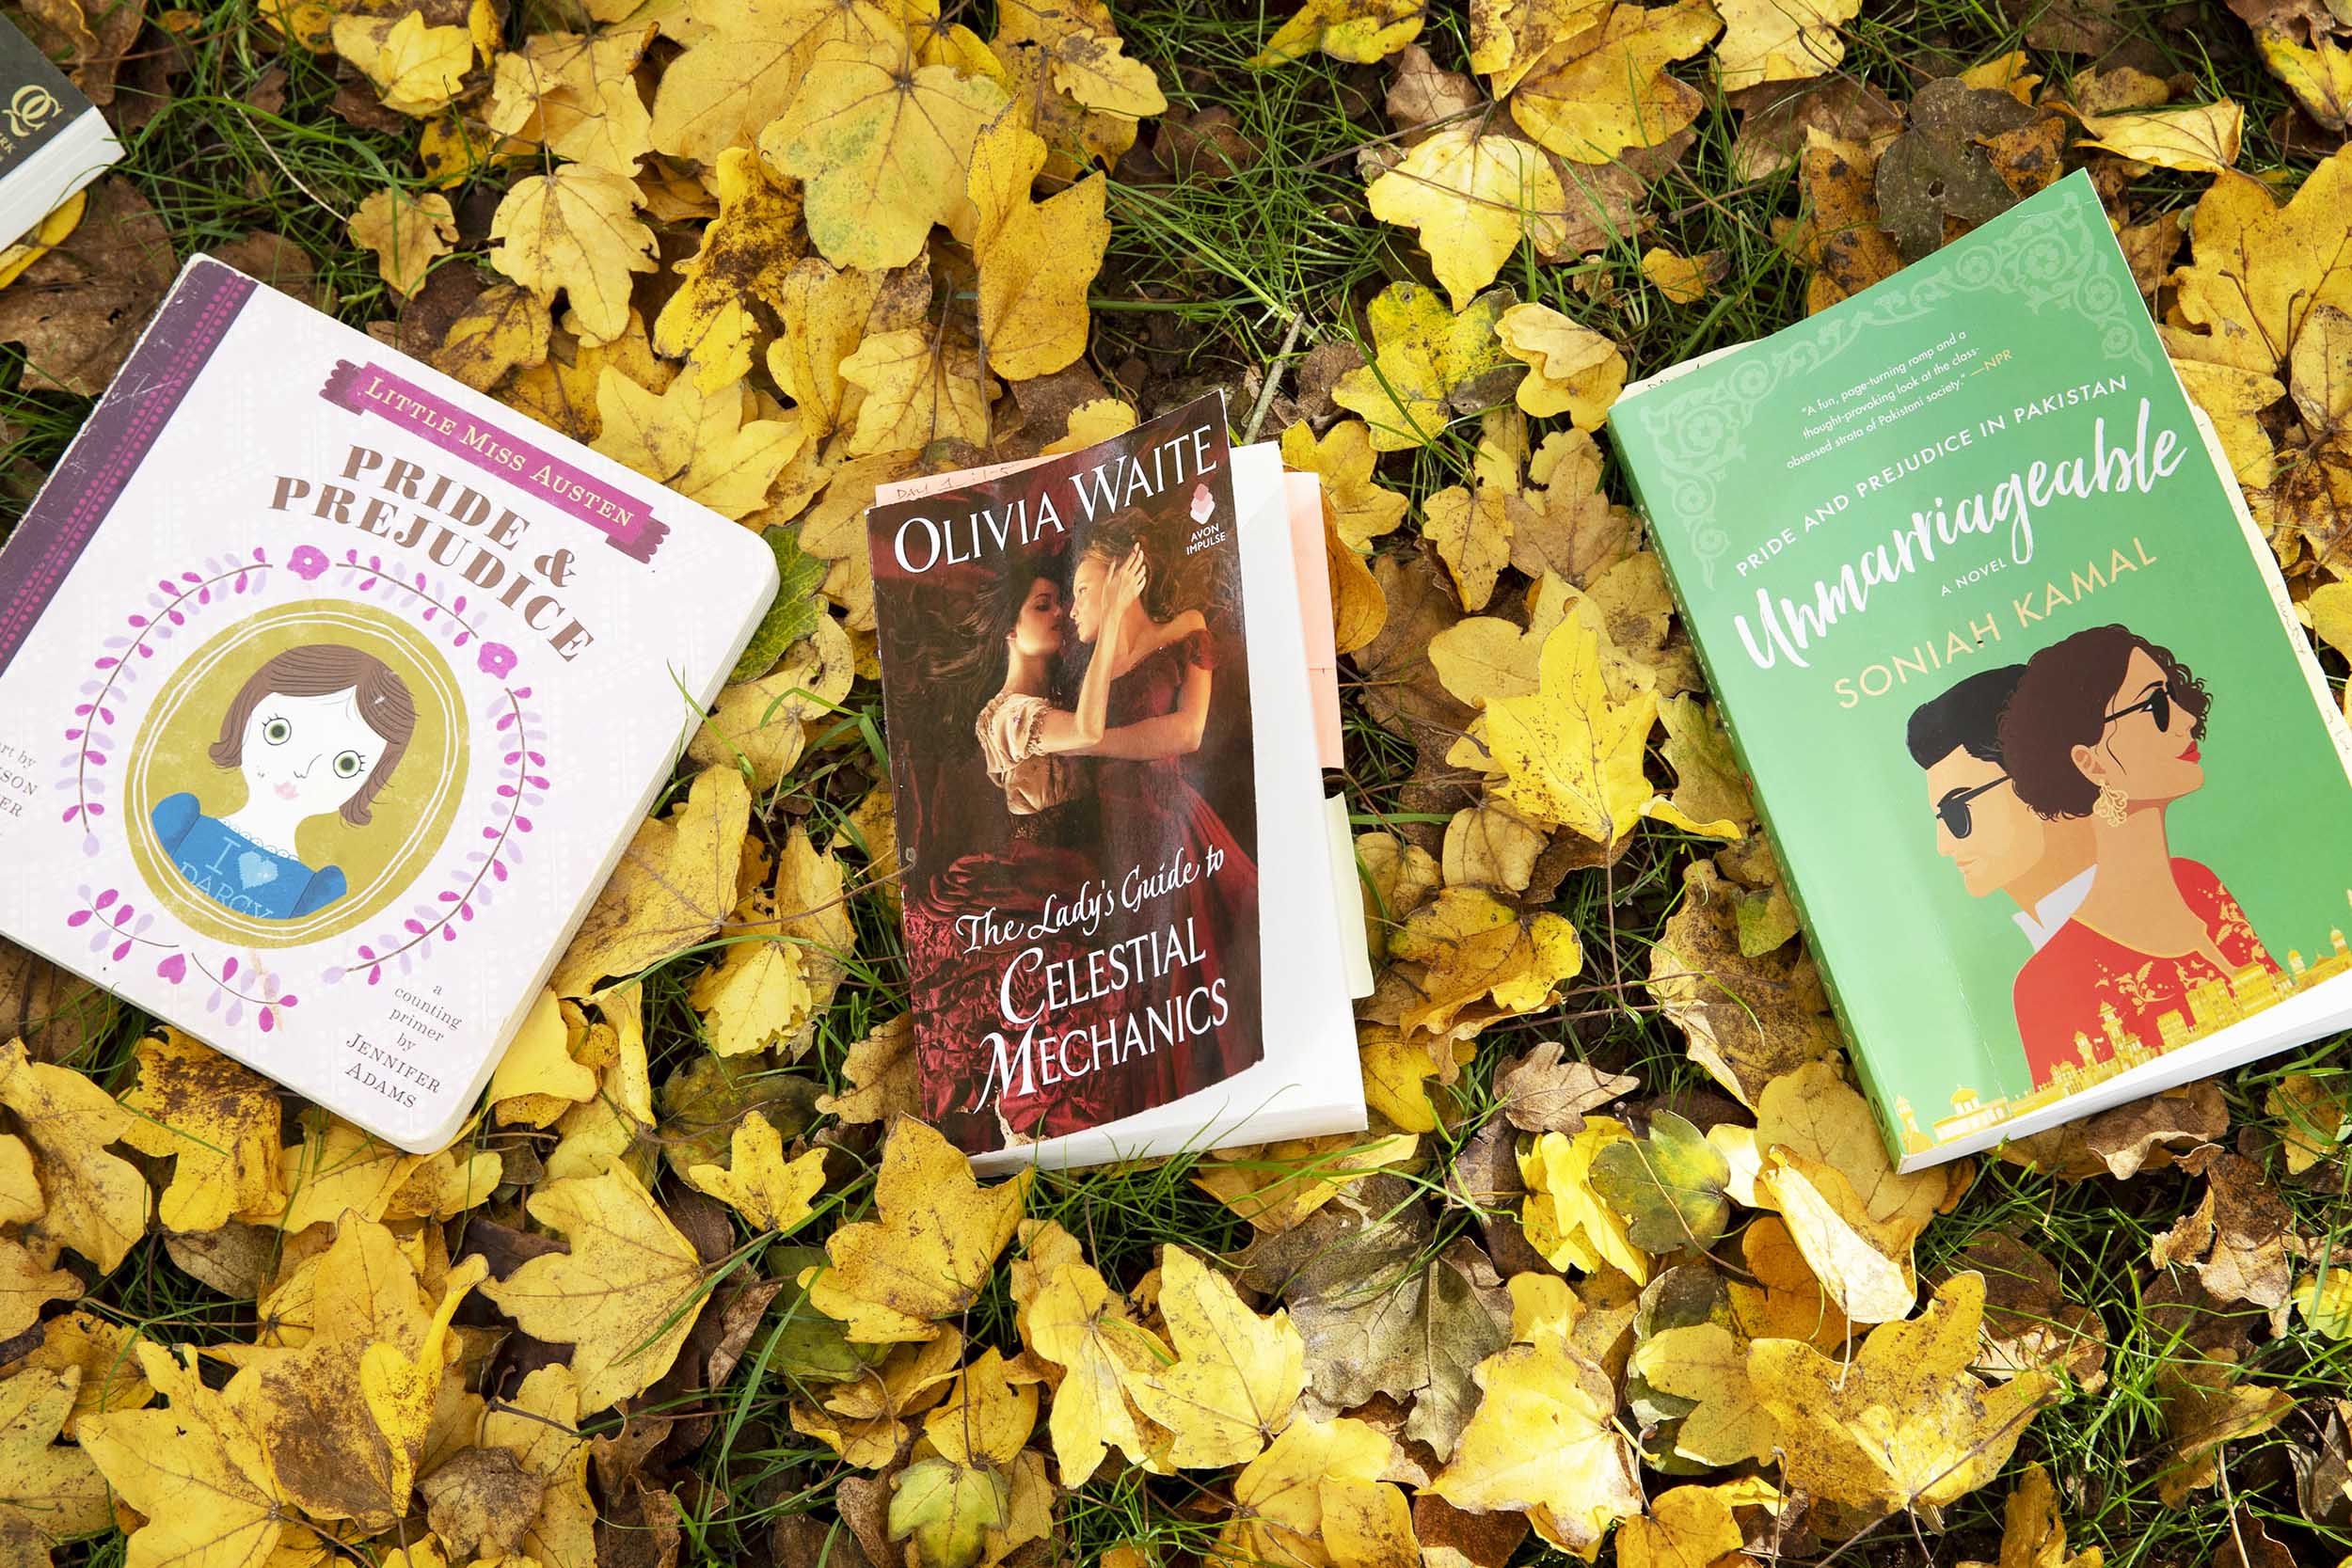 Three books laying in yellow leaves.  Left to Right: Little Miss Austen Pride & Prejudice, Olivia Waite The Lady's Guide to Celestial Mechanics, and Unmarriageable